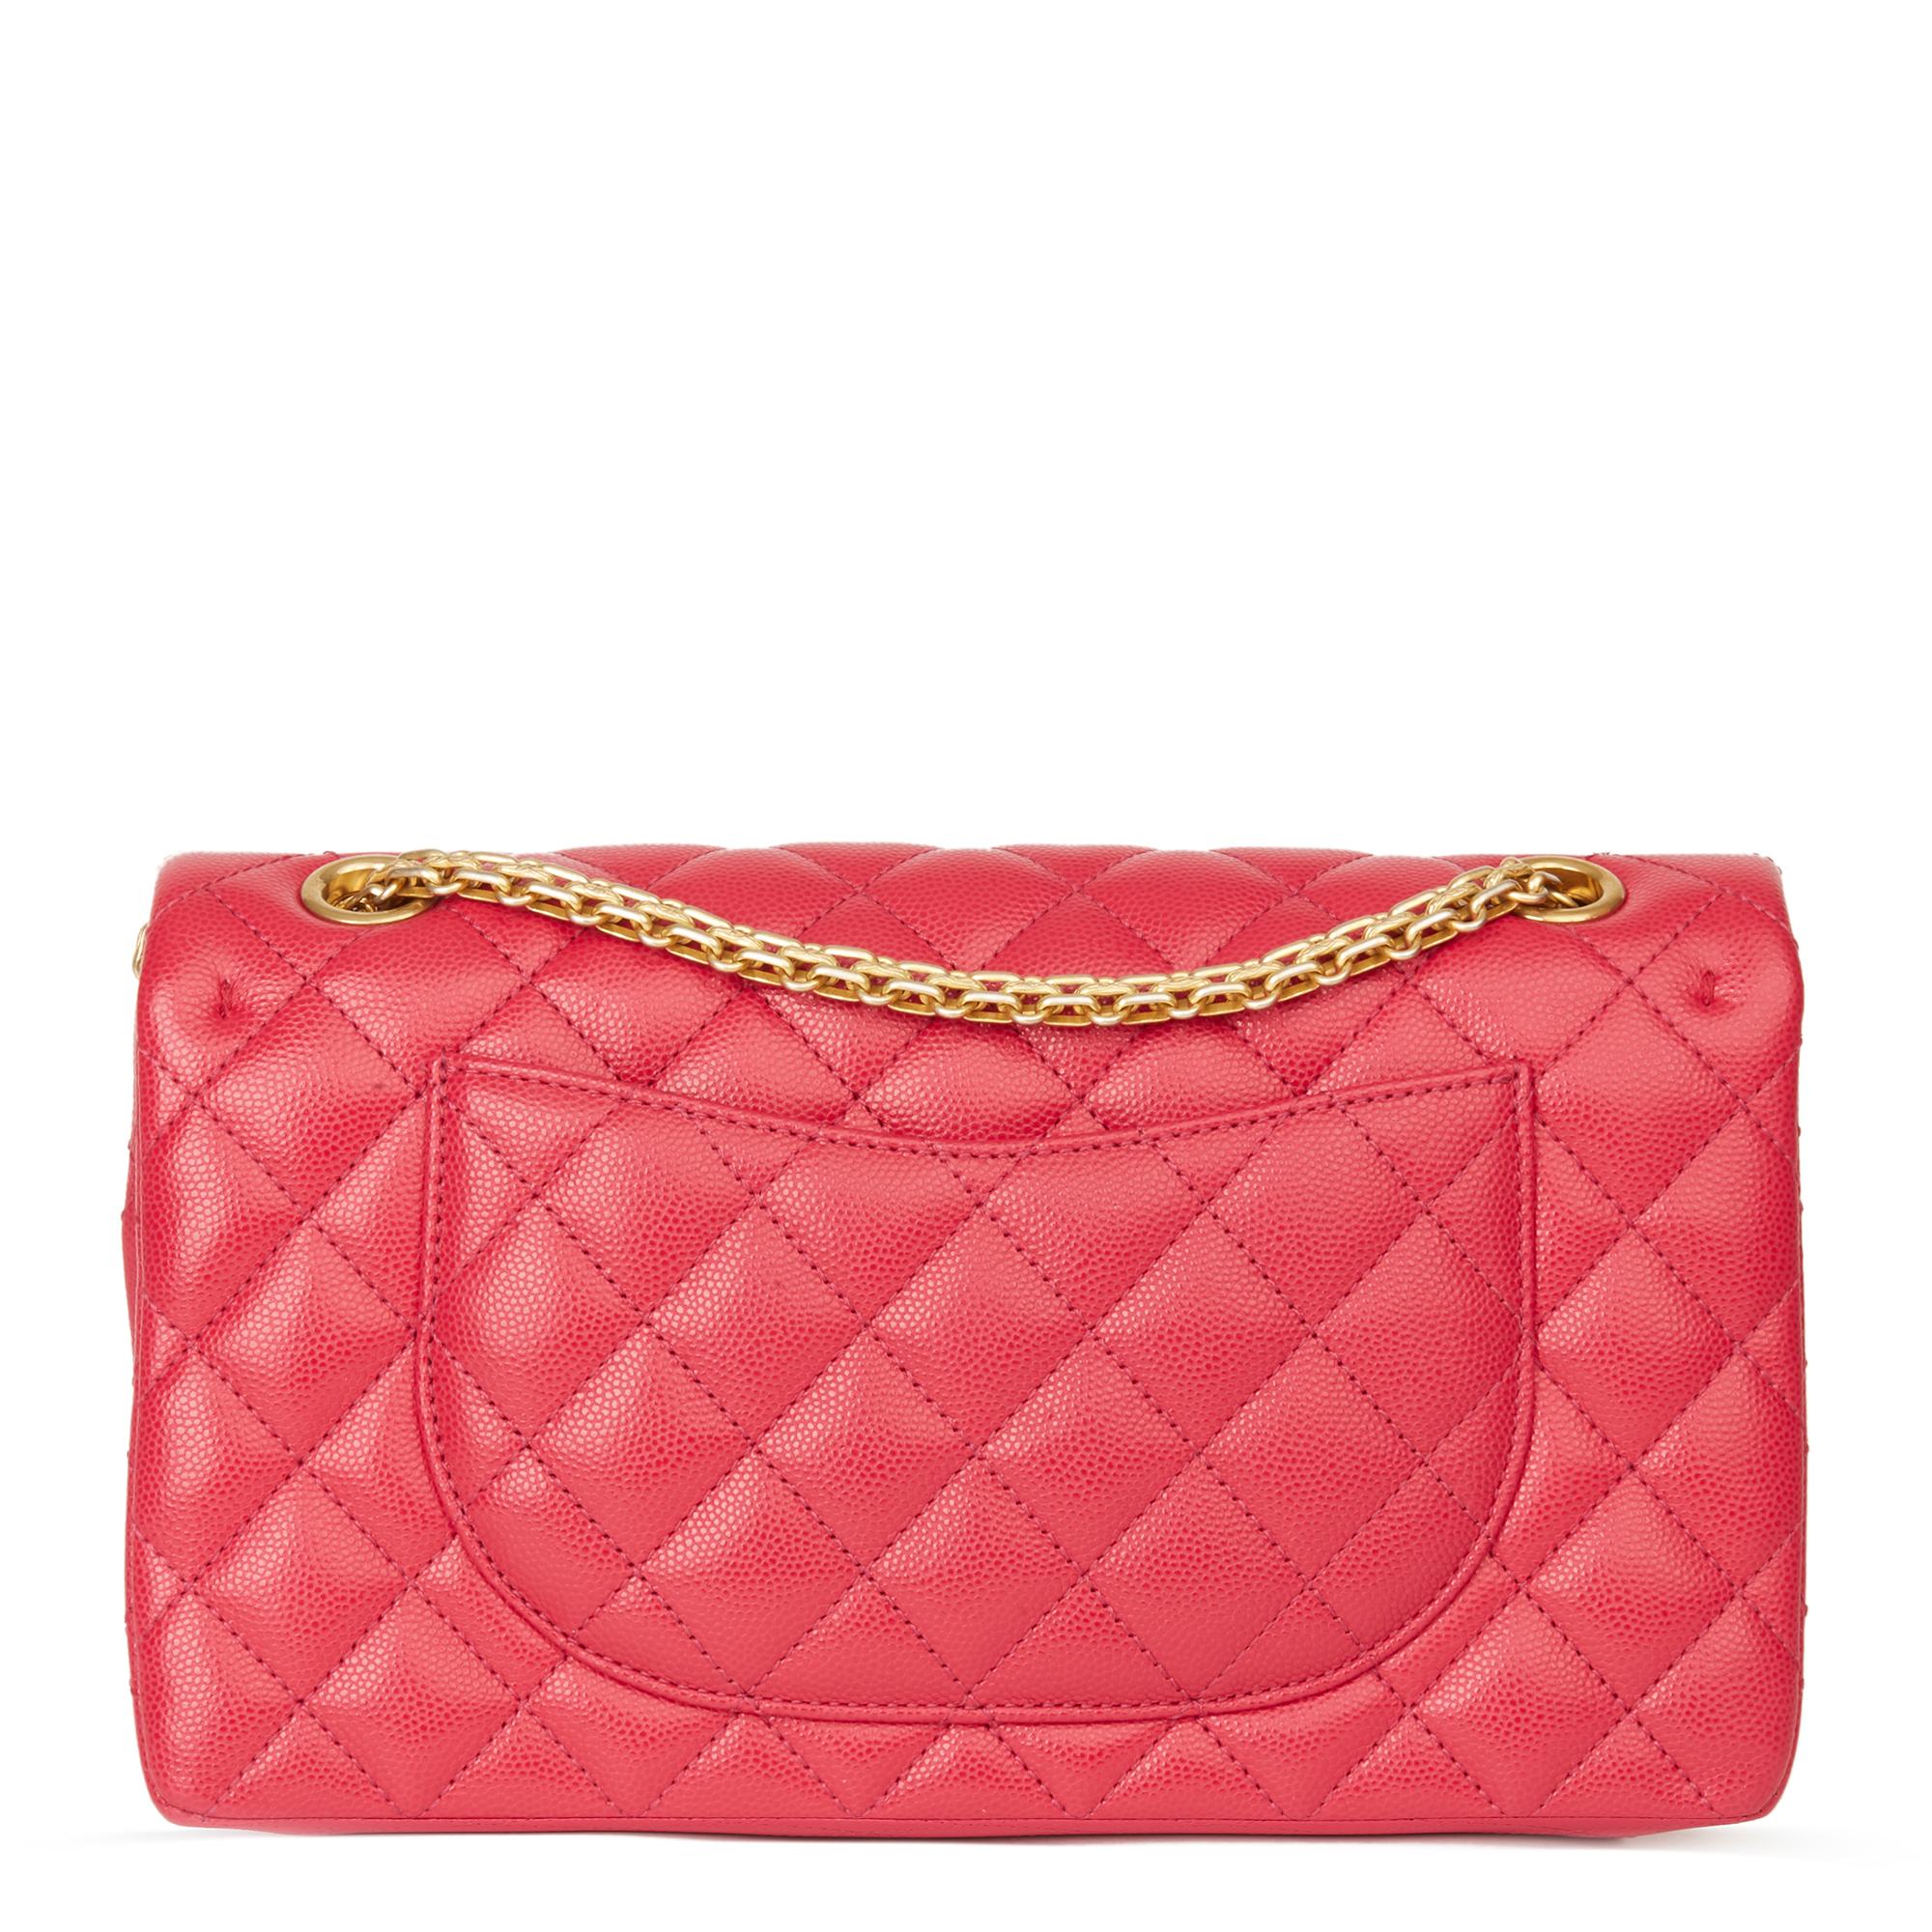 2017 Chanel Magenta Chevron Quilted Caviar Leather 2.55 Reissue Double Flap Bag In Excellent Condition In Bishop's Stortford, Hertfordshire